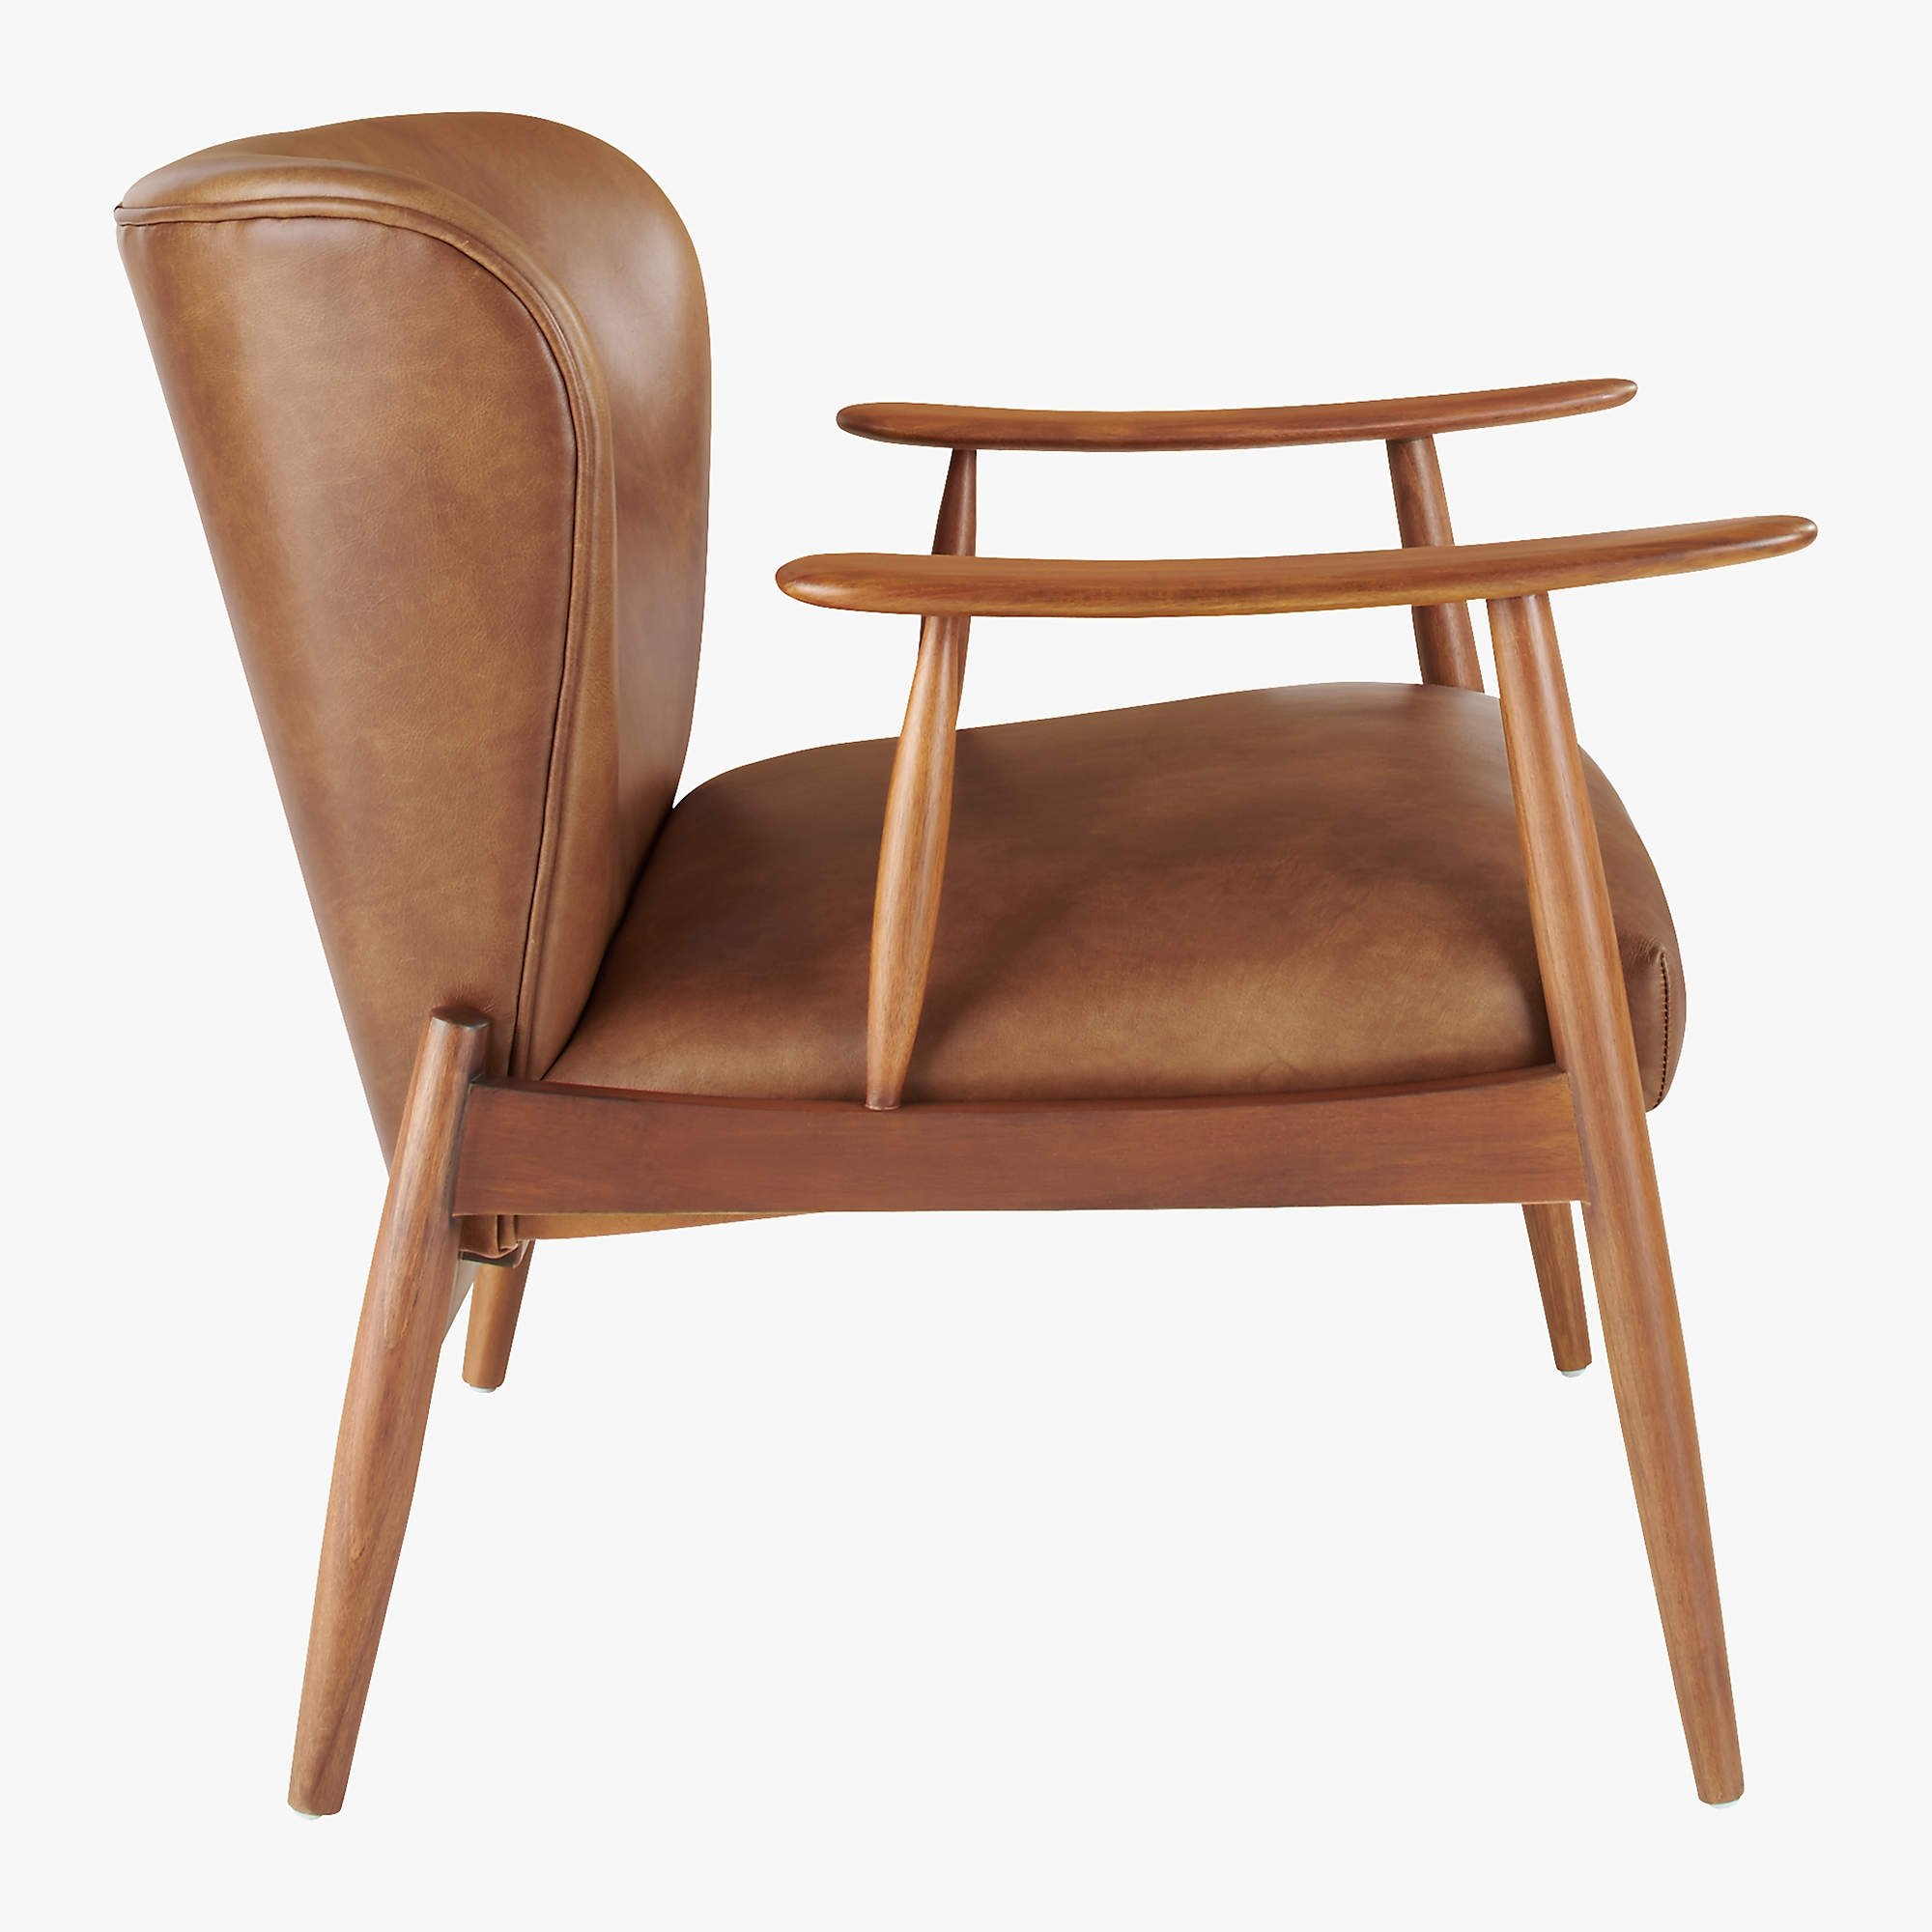 Troubadour Saddle Leather Wood Frame Chair, Kasen Brown RESTOCK Late June 2022 - Image 2